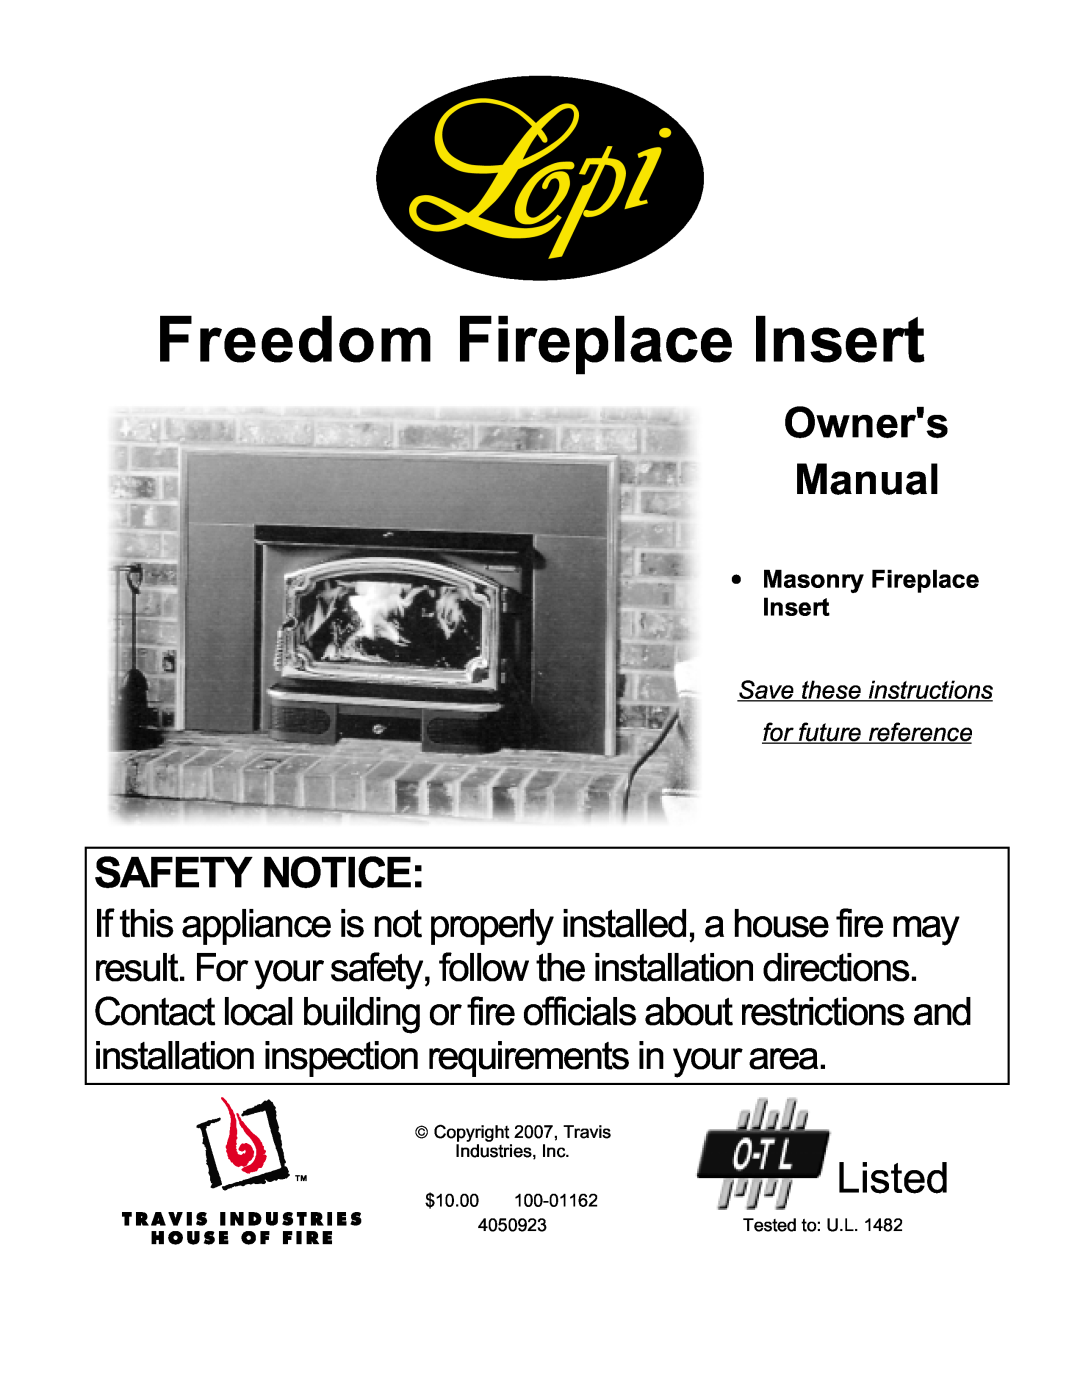 Lopi Freedom Fireplace Insert owner manual Safety Notice, Listed 